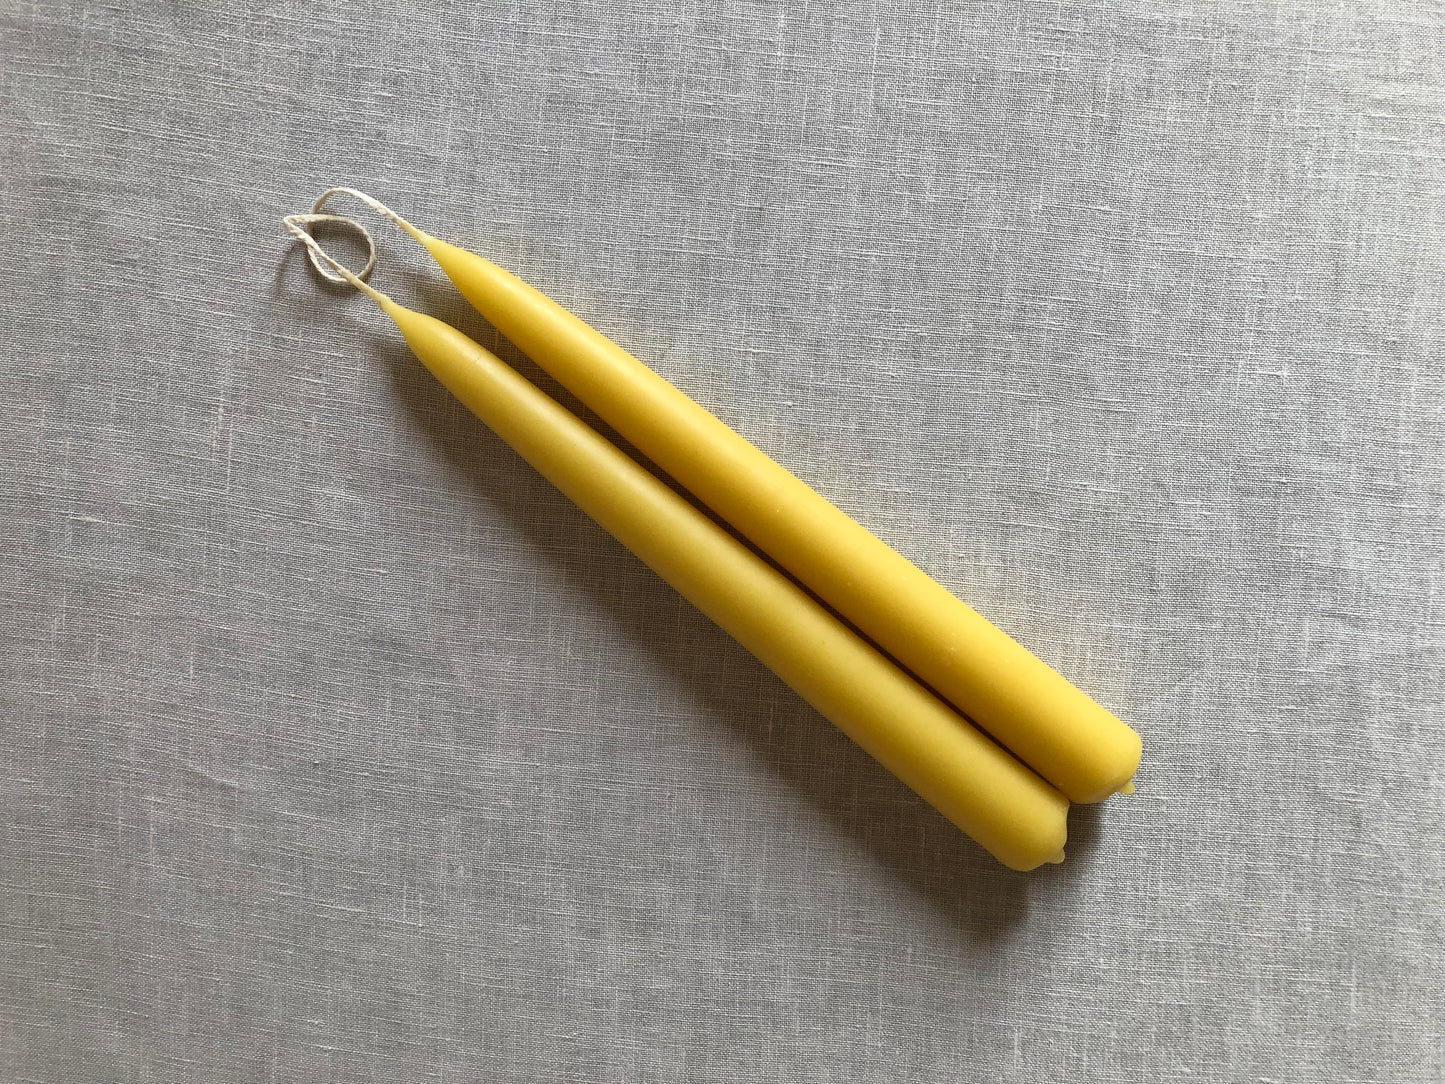 V.VM Tapered Beeswax Candles - 20cm